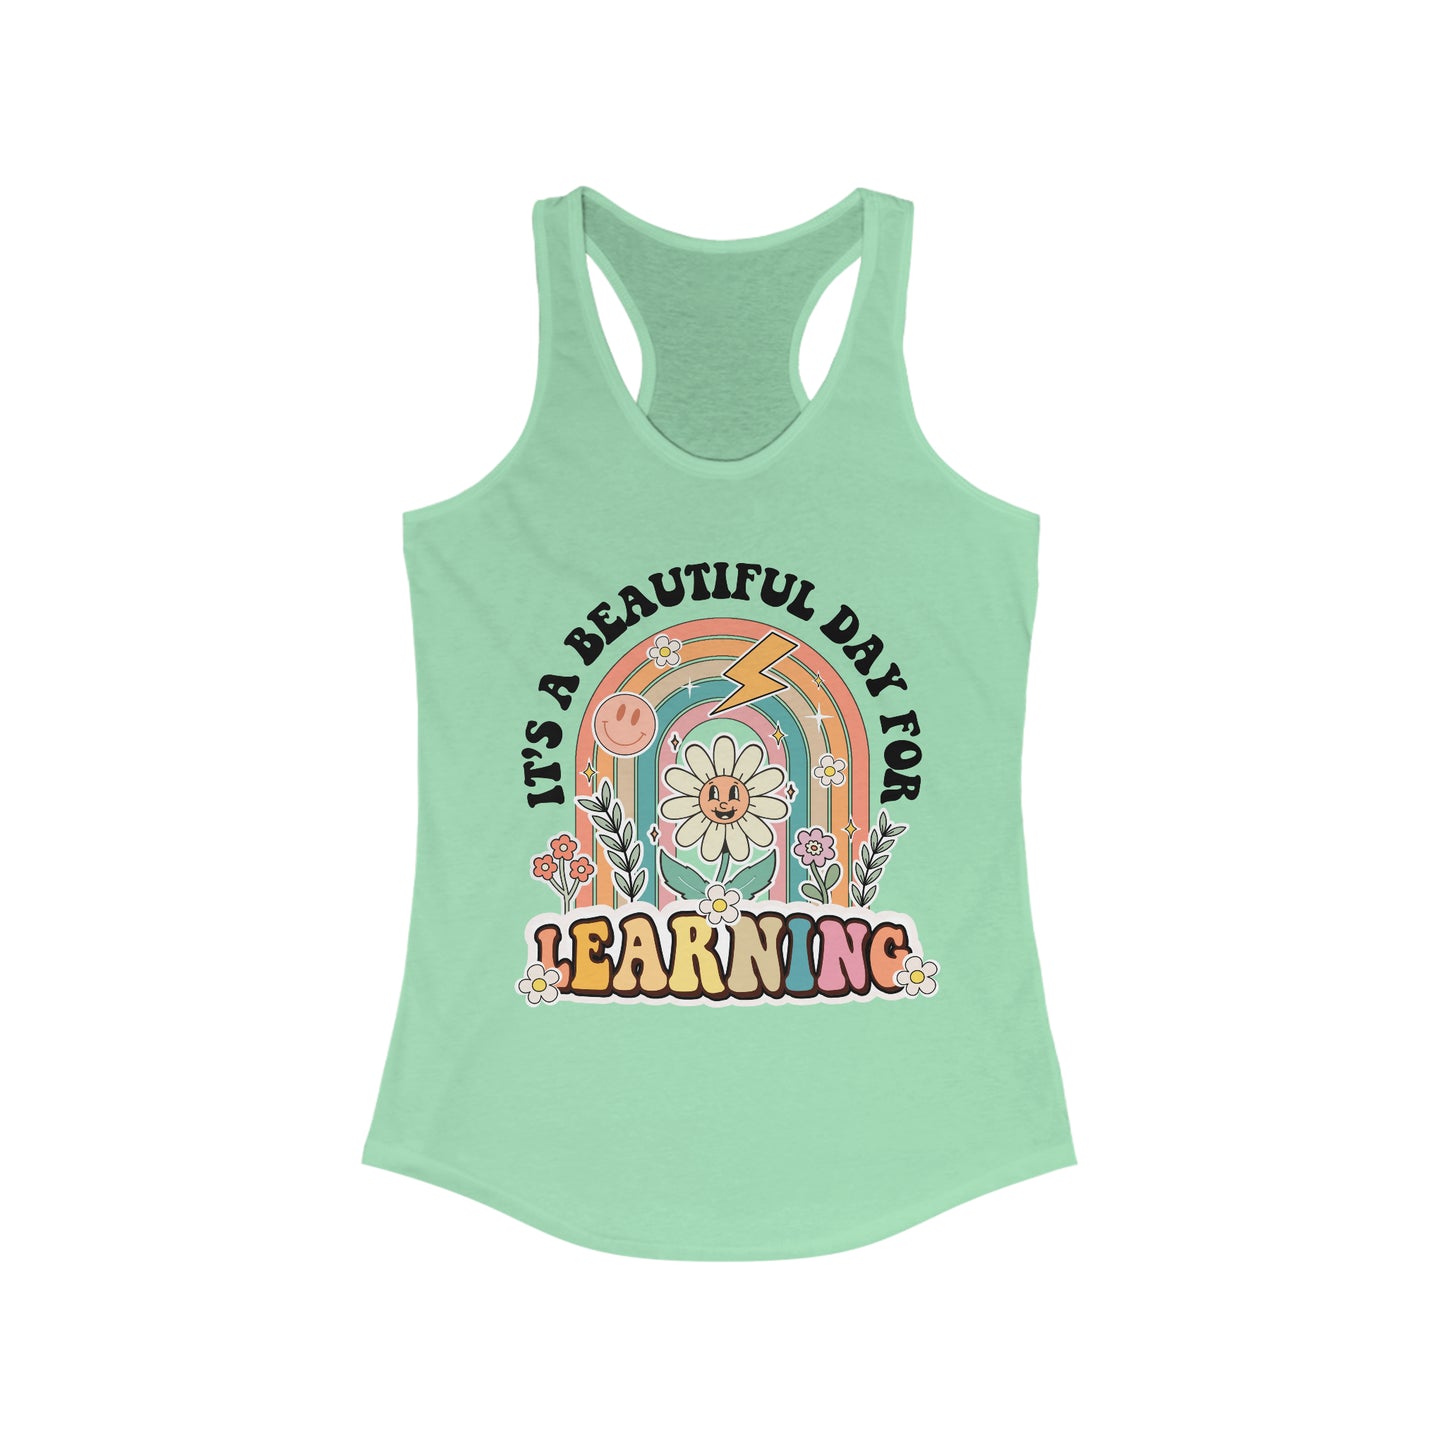 It’s a Beautiful Day for Learning - Women's Ideal Racerback Tank